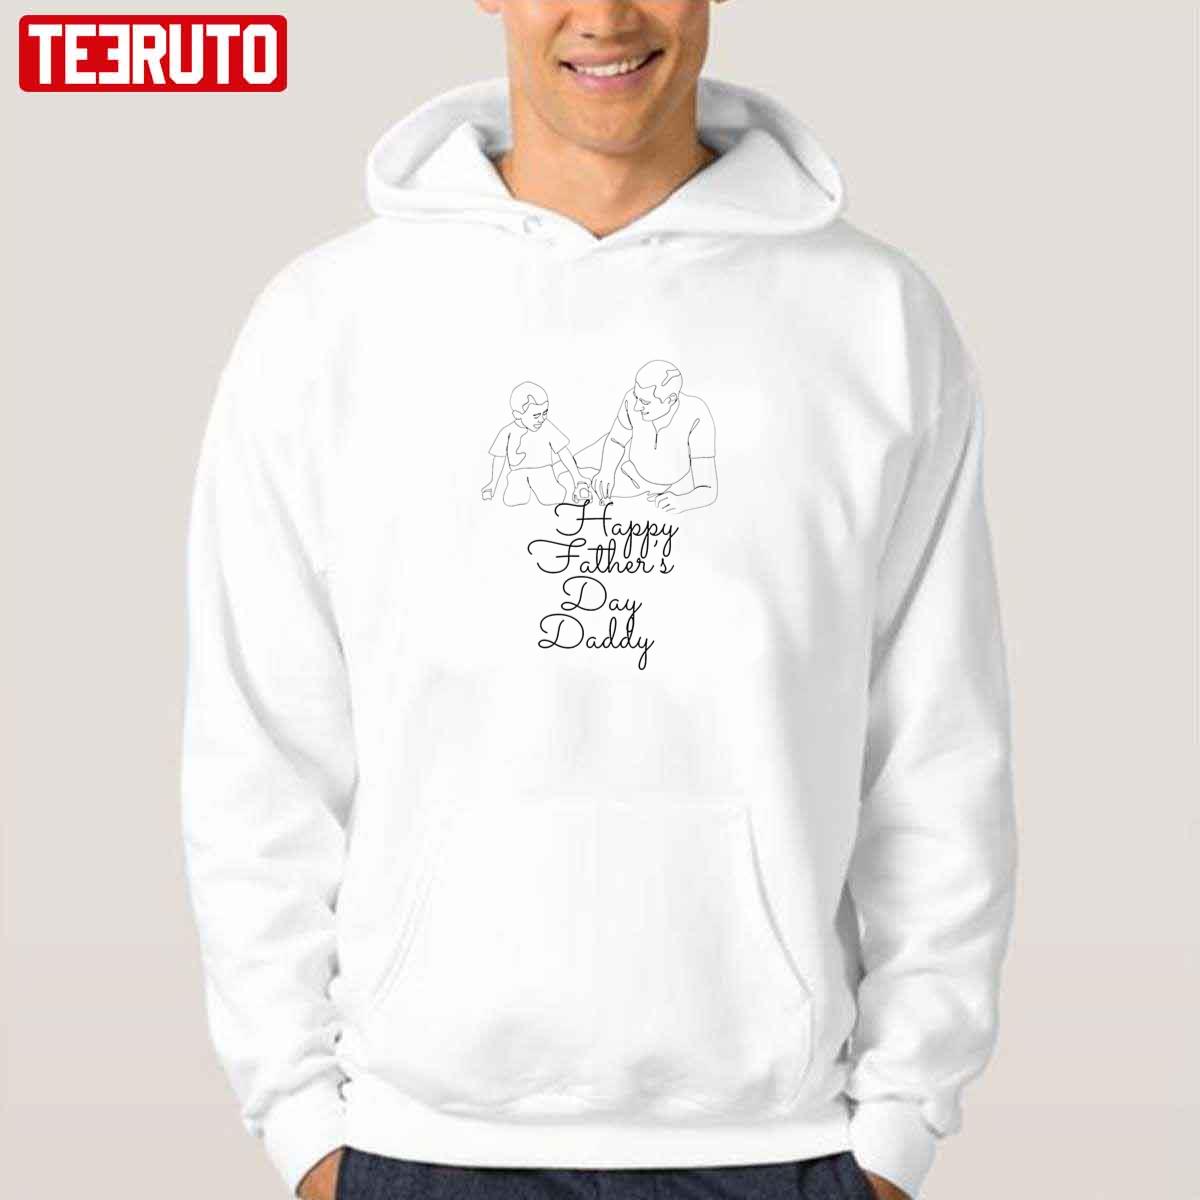 Happy Father’s Day Daddy Unisex Hoodie - Teeruto